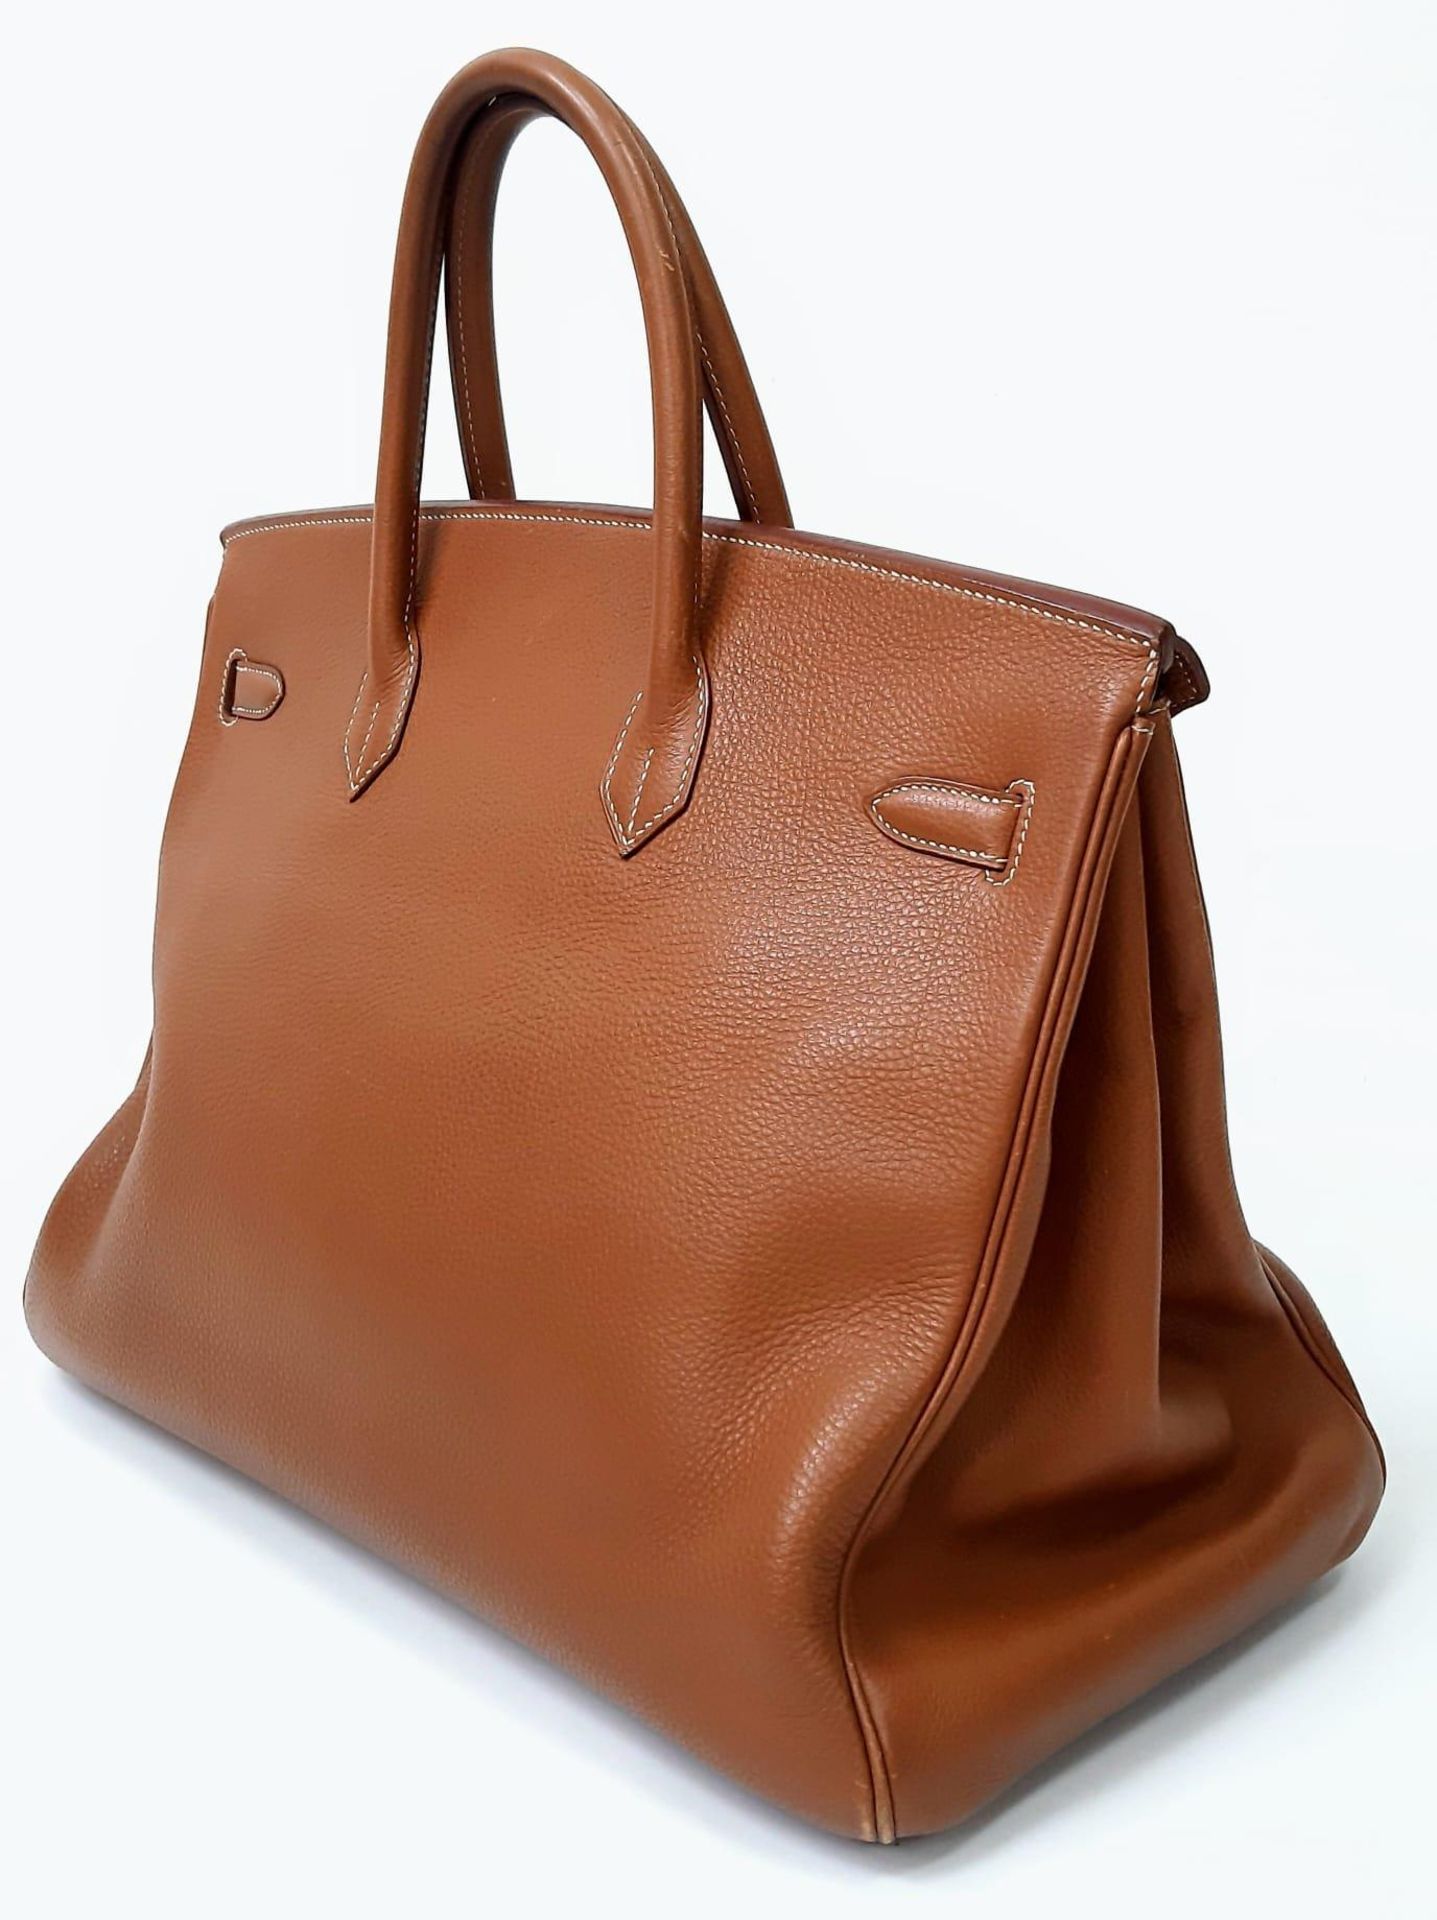 A Hermes Birkin Brown Leather Tote Bag. Handcrafted from the highest quality leather by skilled - Bild 5 aus 17